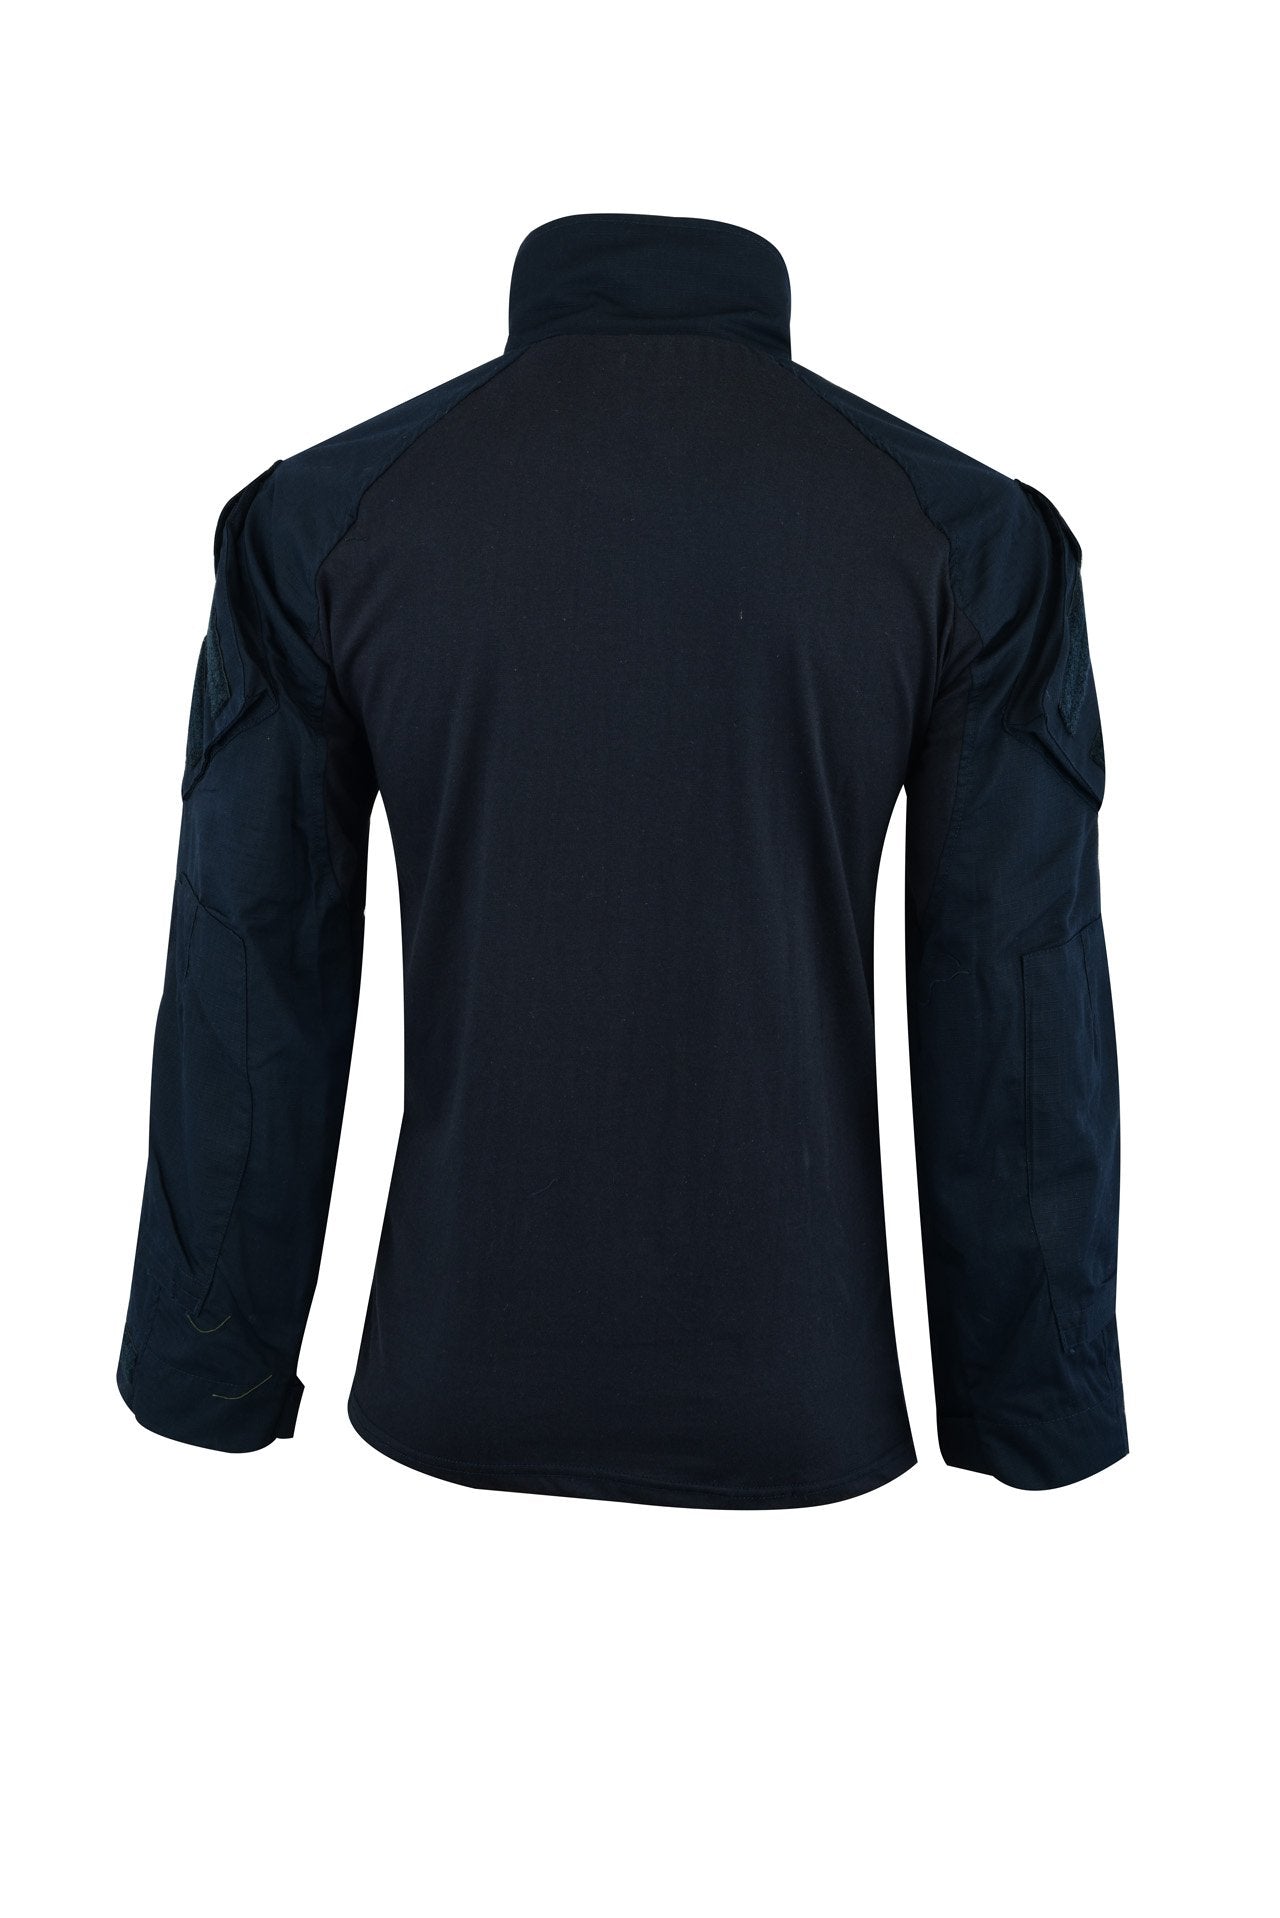 Tactical Zone HYBRID TACTICAL SHIRT IS A PERFECT COMBAT SHIRT Colour  Navy Blue Back